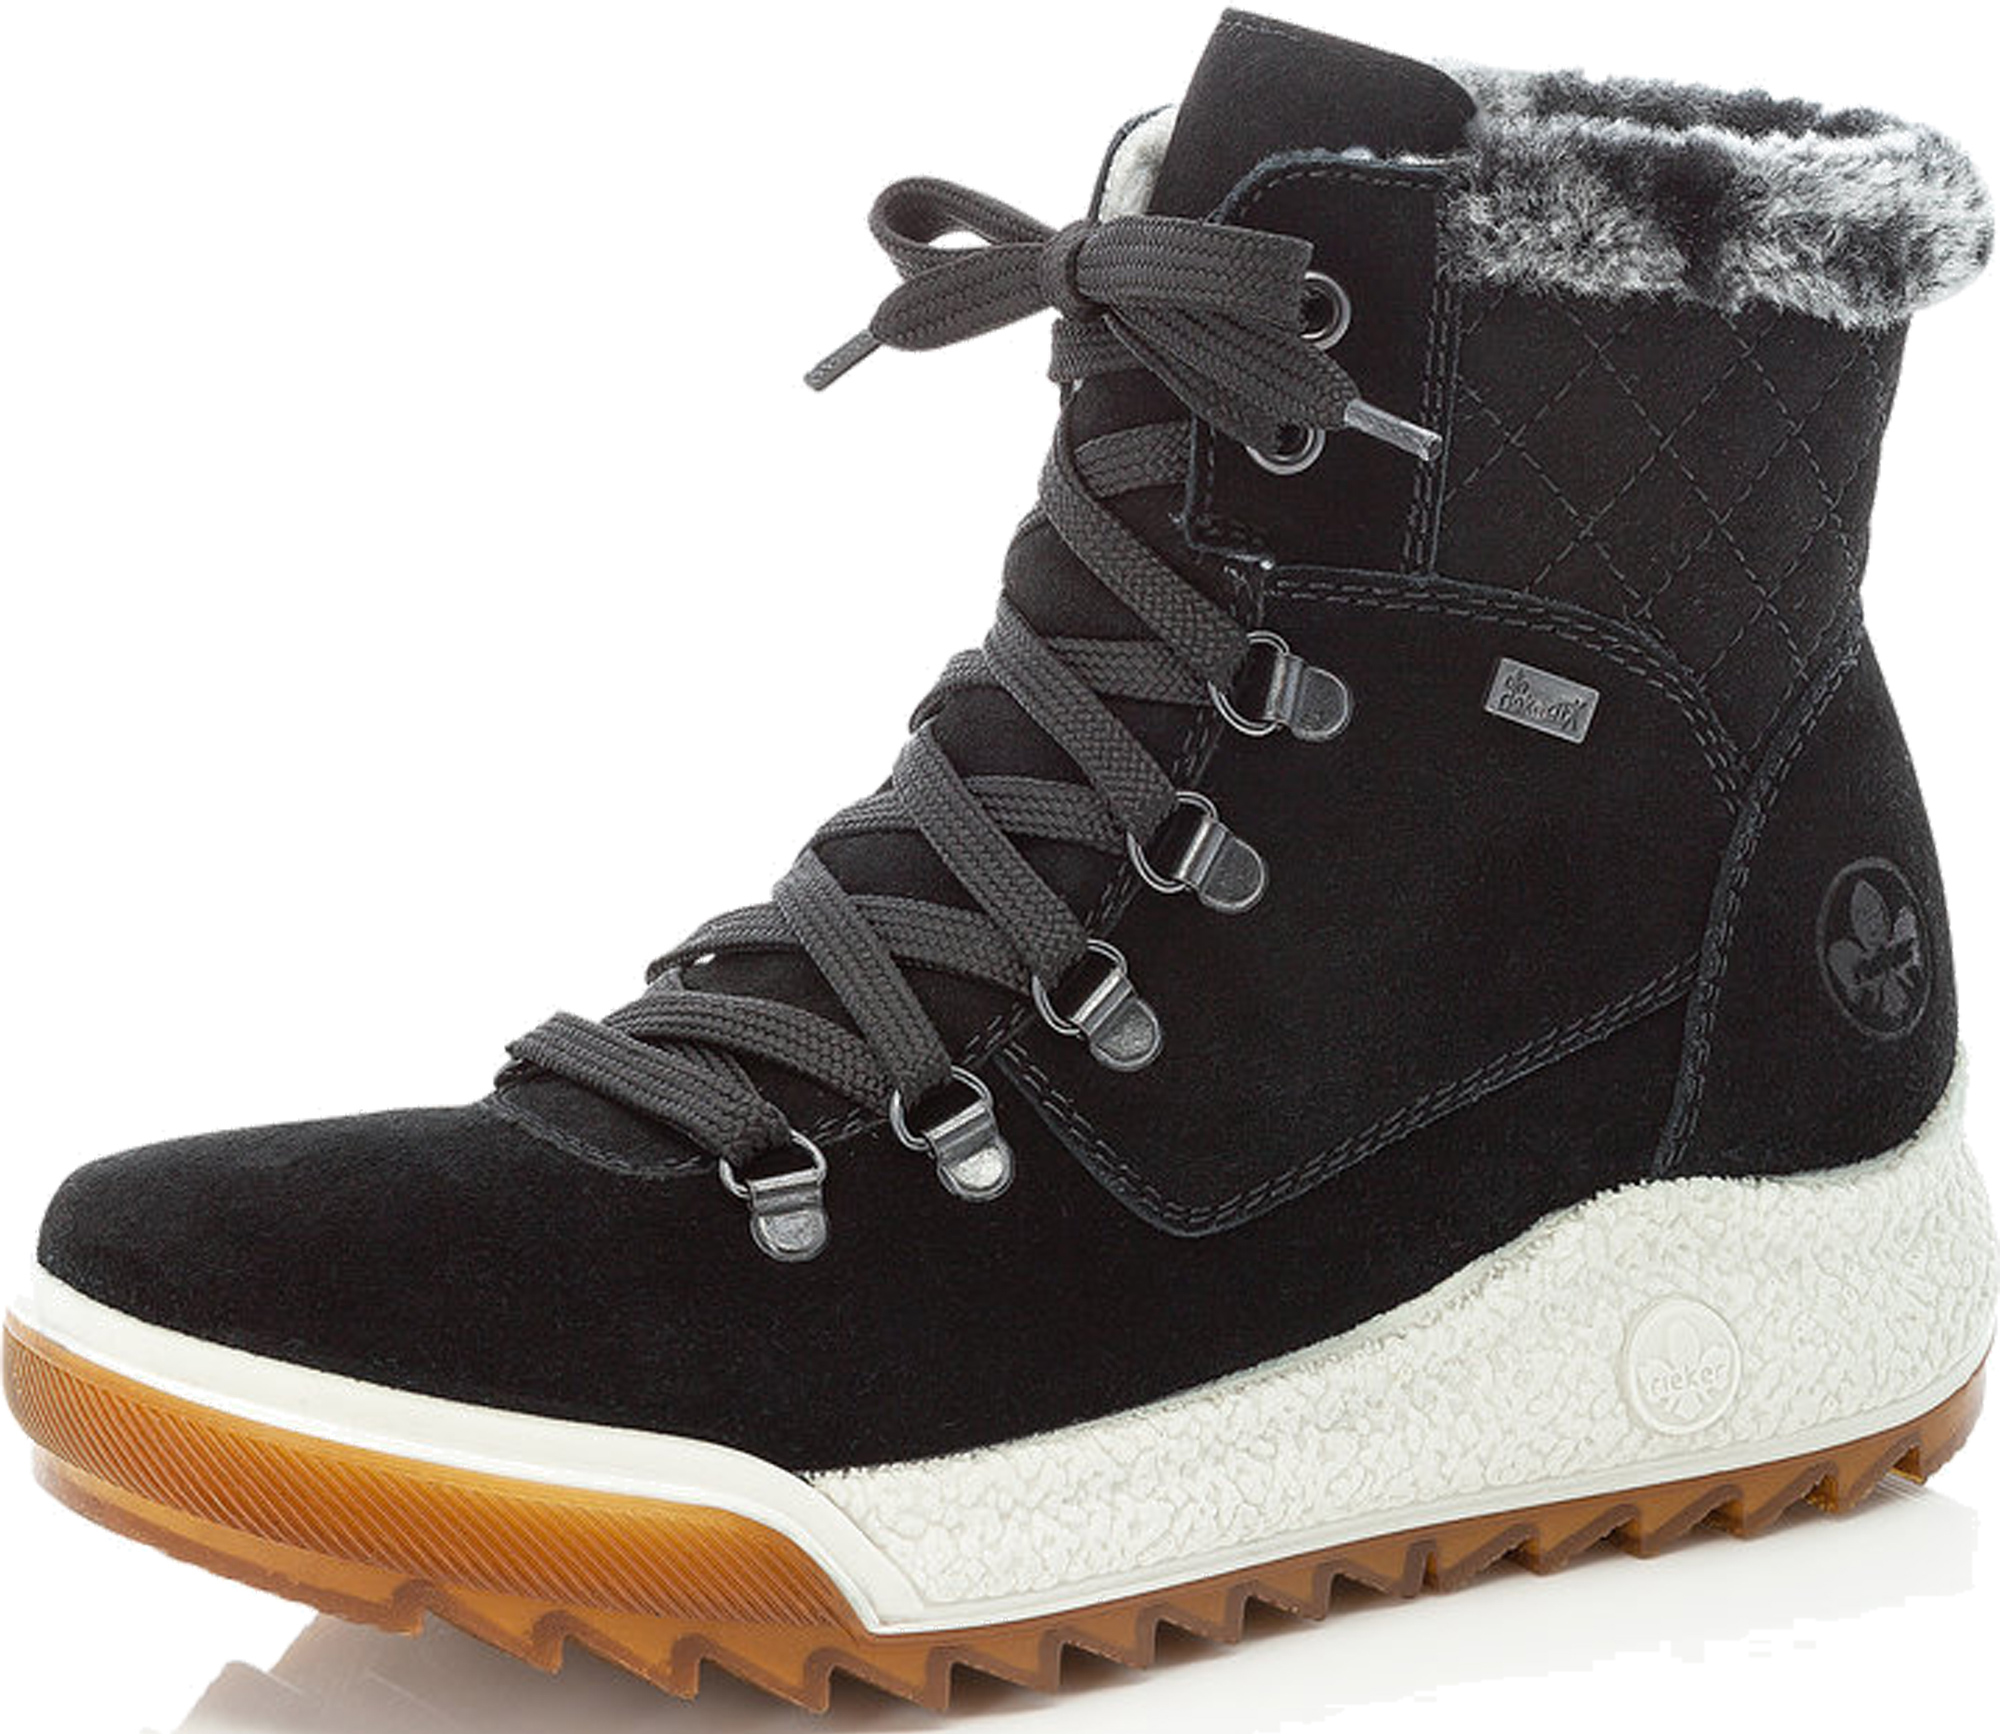 Rieker Black Saw Tooth Sole D Ring Suede Hiker size 6/7